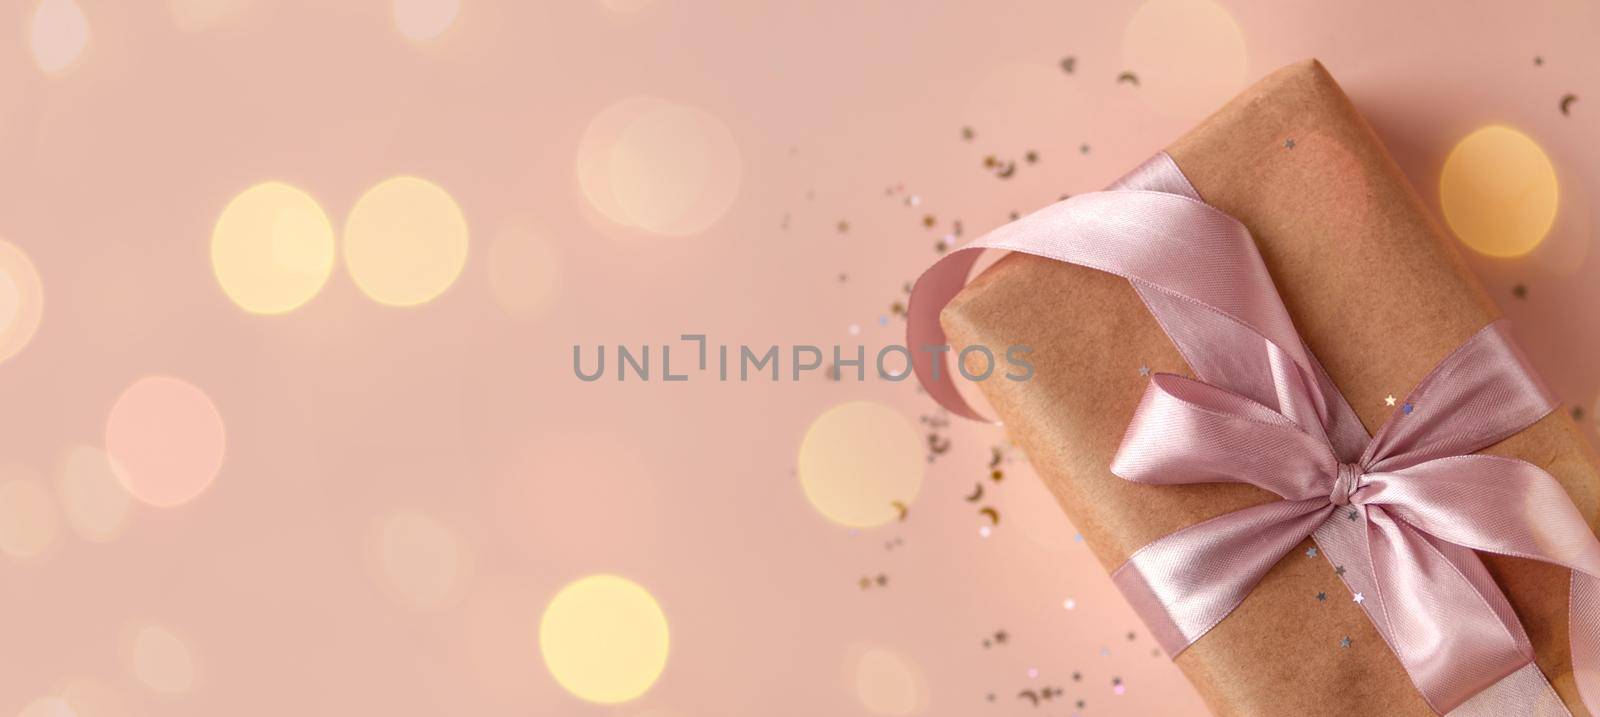 Banner of Birthday or New Year's eve present in kraft paper with pink ribbon on a soft beige background with glitter and confetti. Xmas. Flat lay. Happy holidays celebration, giving love concept